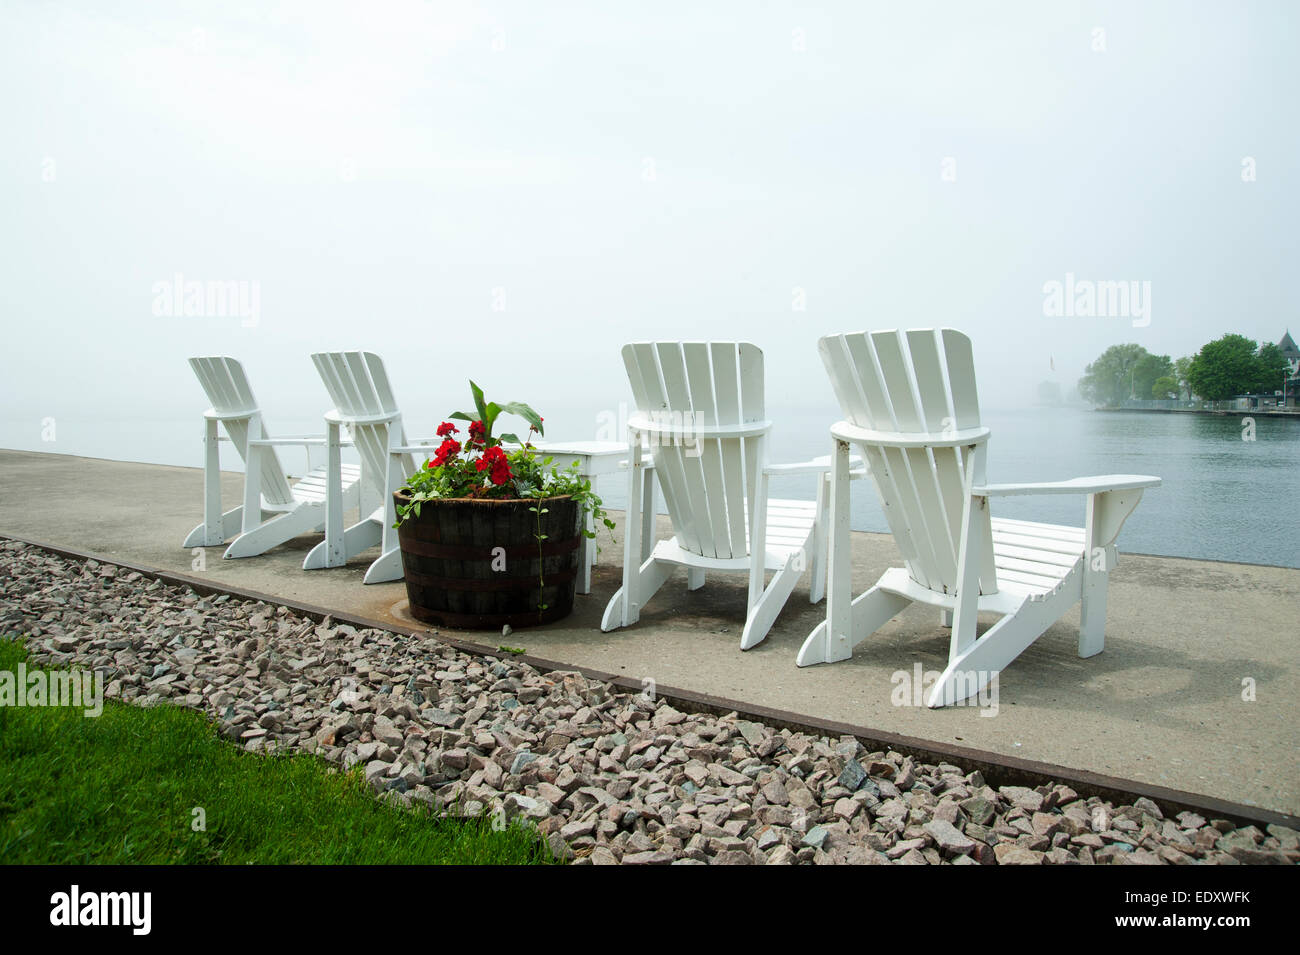 Lawn chairs on a dock with a view out over the St. Lawrence River, Gananoque, Ontario, Canada Stock Photo